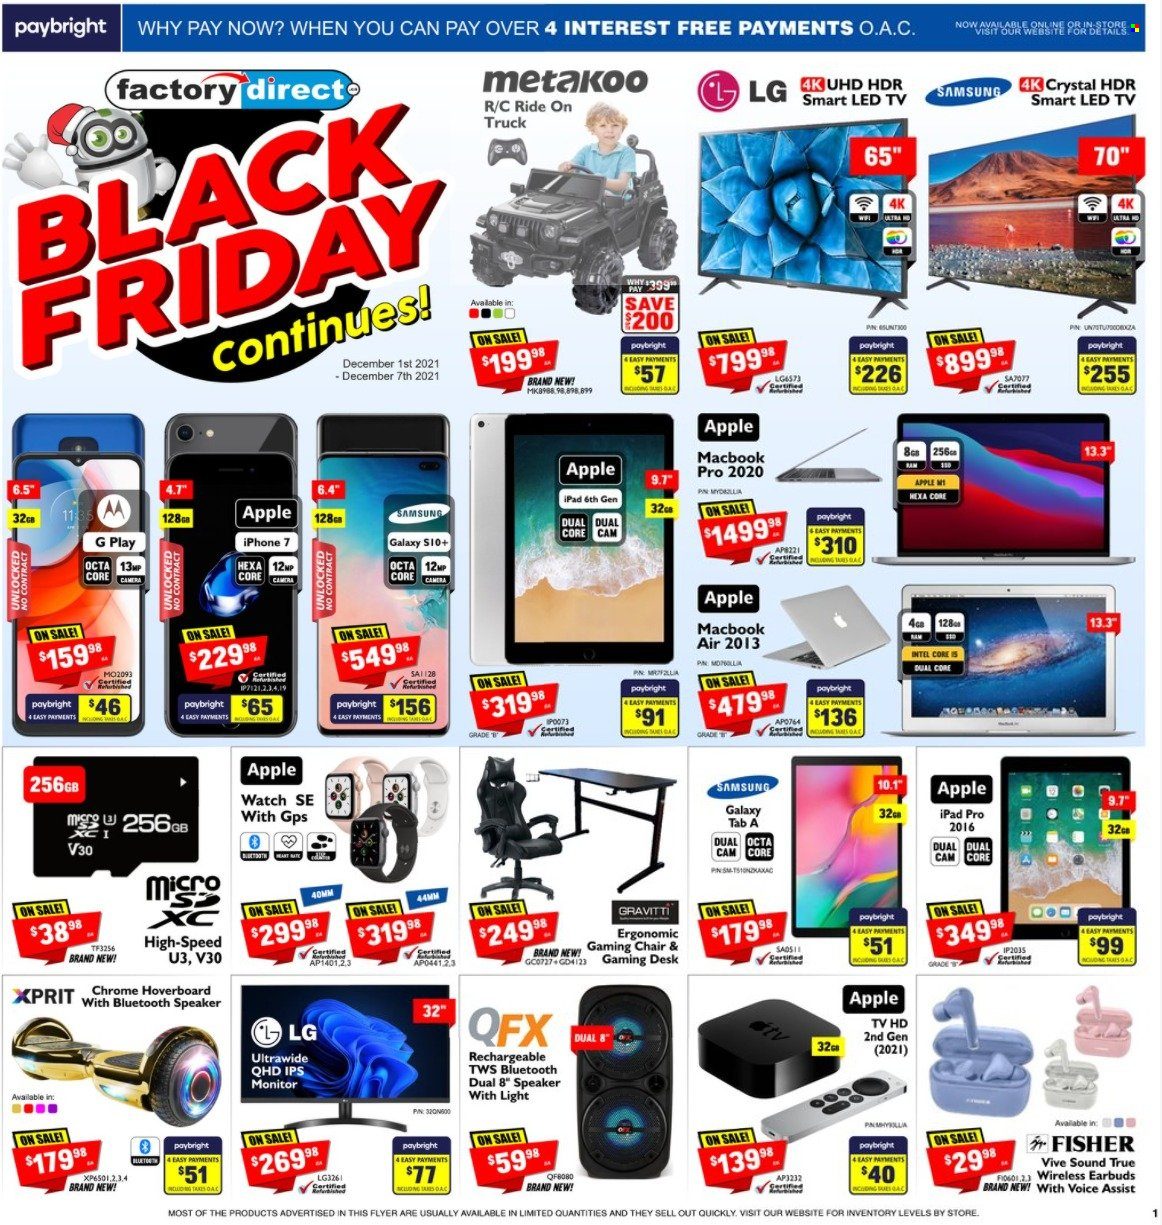 thumbnail - Factory Direct Flyer - December 01, 2021 - December 07, 2021 - Sales products - Intel, Apple, iPad, iPad Pro, Samsung Galaxy, Samsung Galaxy Tab, pin, Samsung, iPhone, Apple Watch SE, MacBook, MacBook Air, TV, speaker, bluetooth speaker, earbuds, camera, LED TV, LG, monitor, Apple Watch, iPhone 7. Page 1.